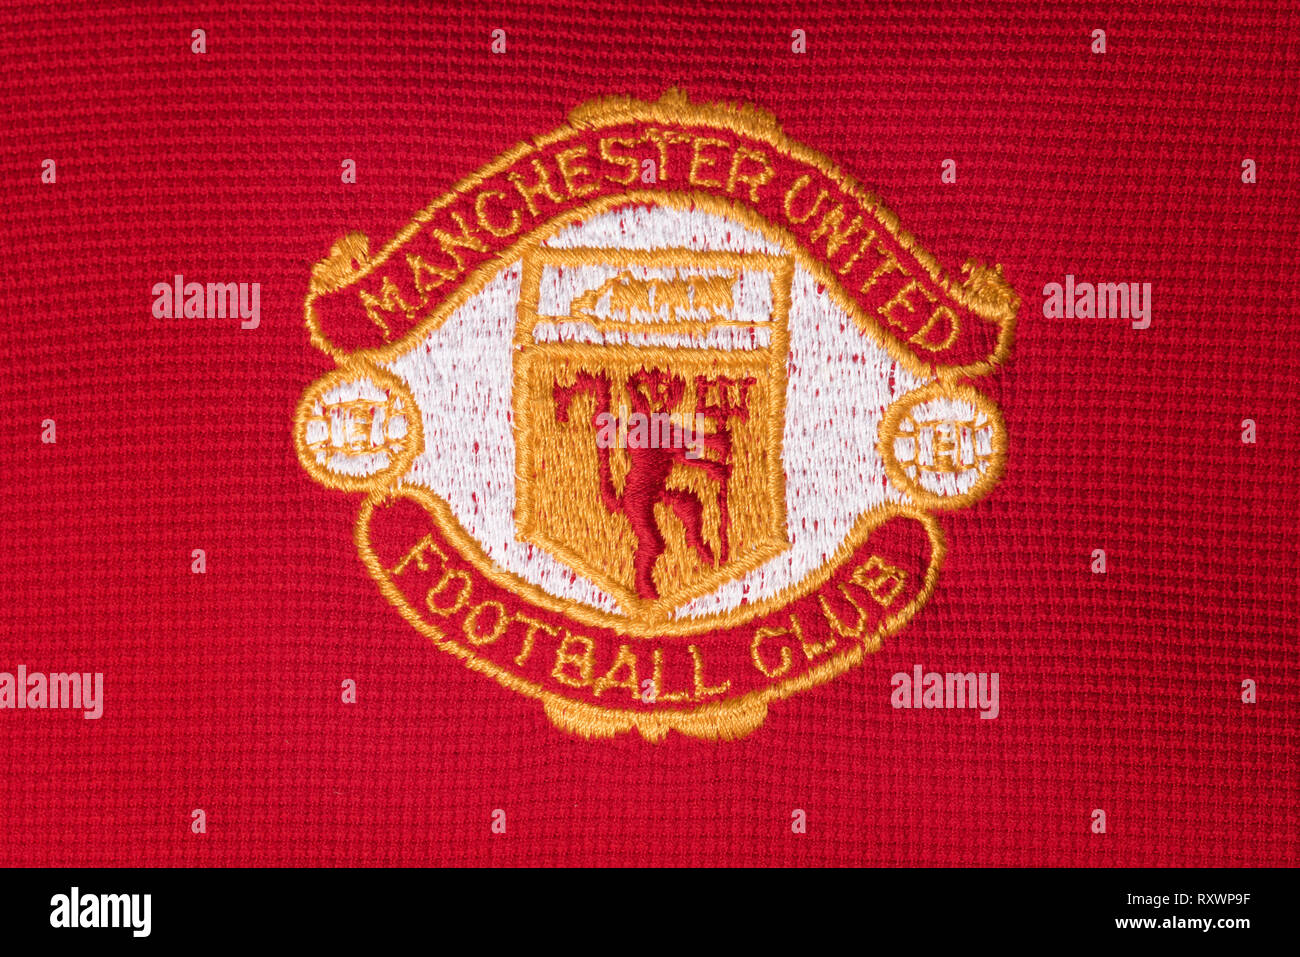 Close up of a retro Manchester United Jersey. Stock Photo